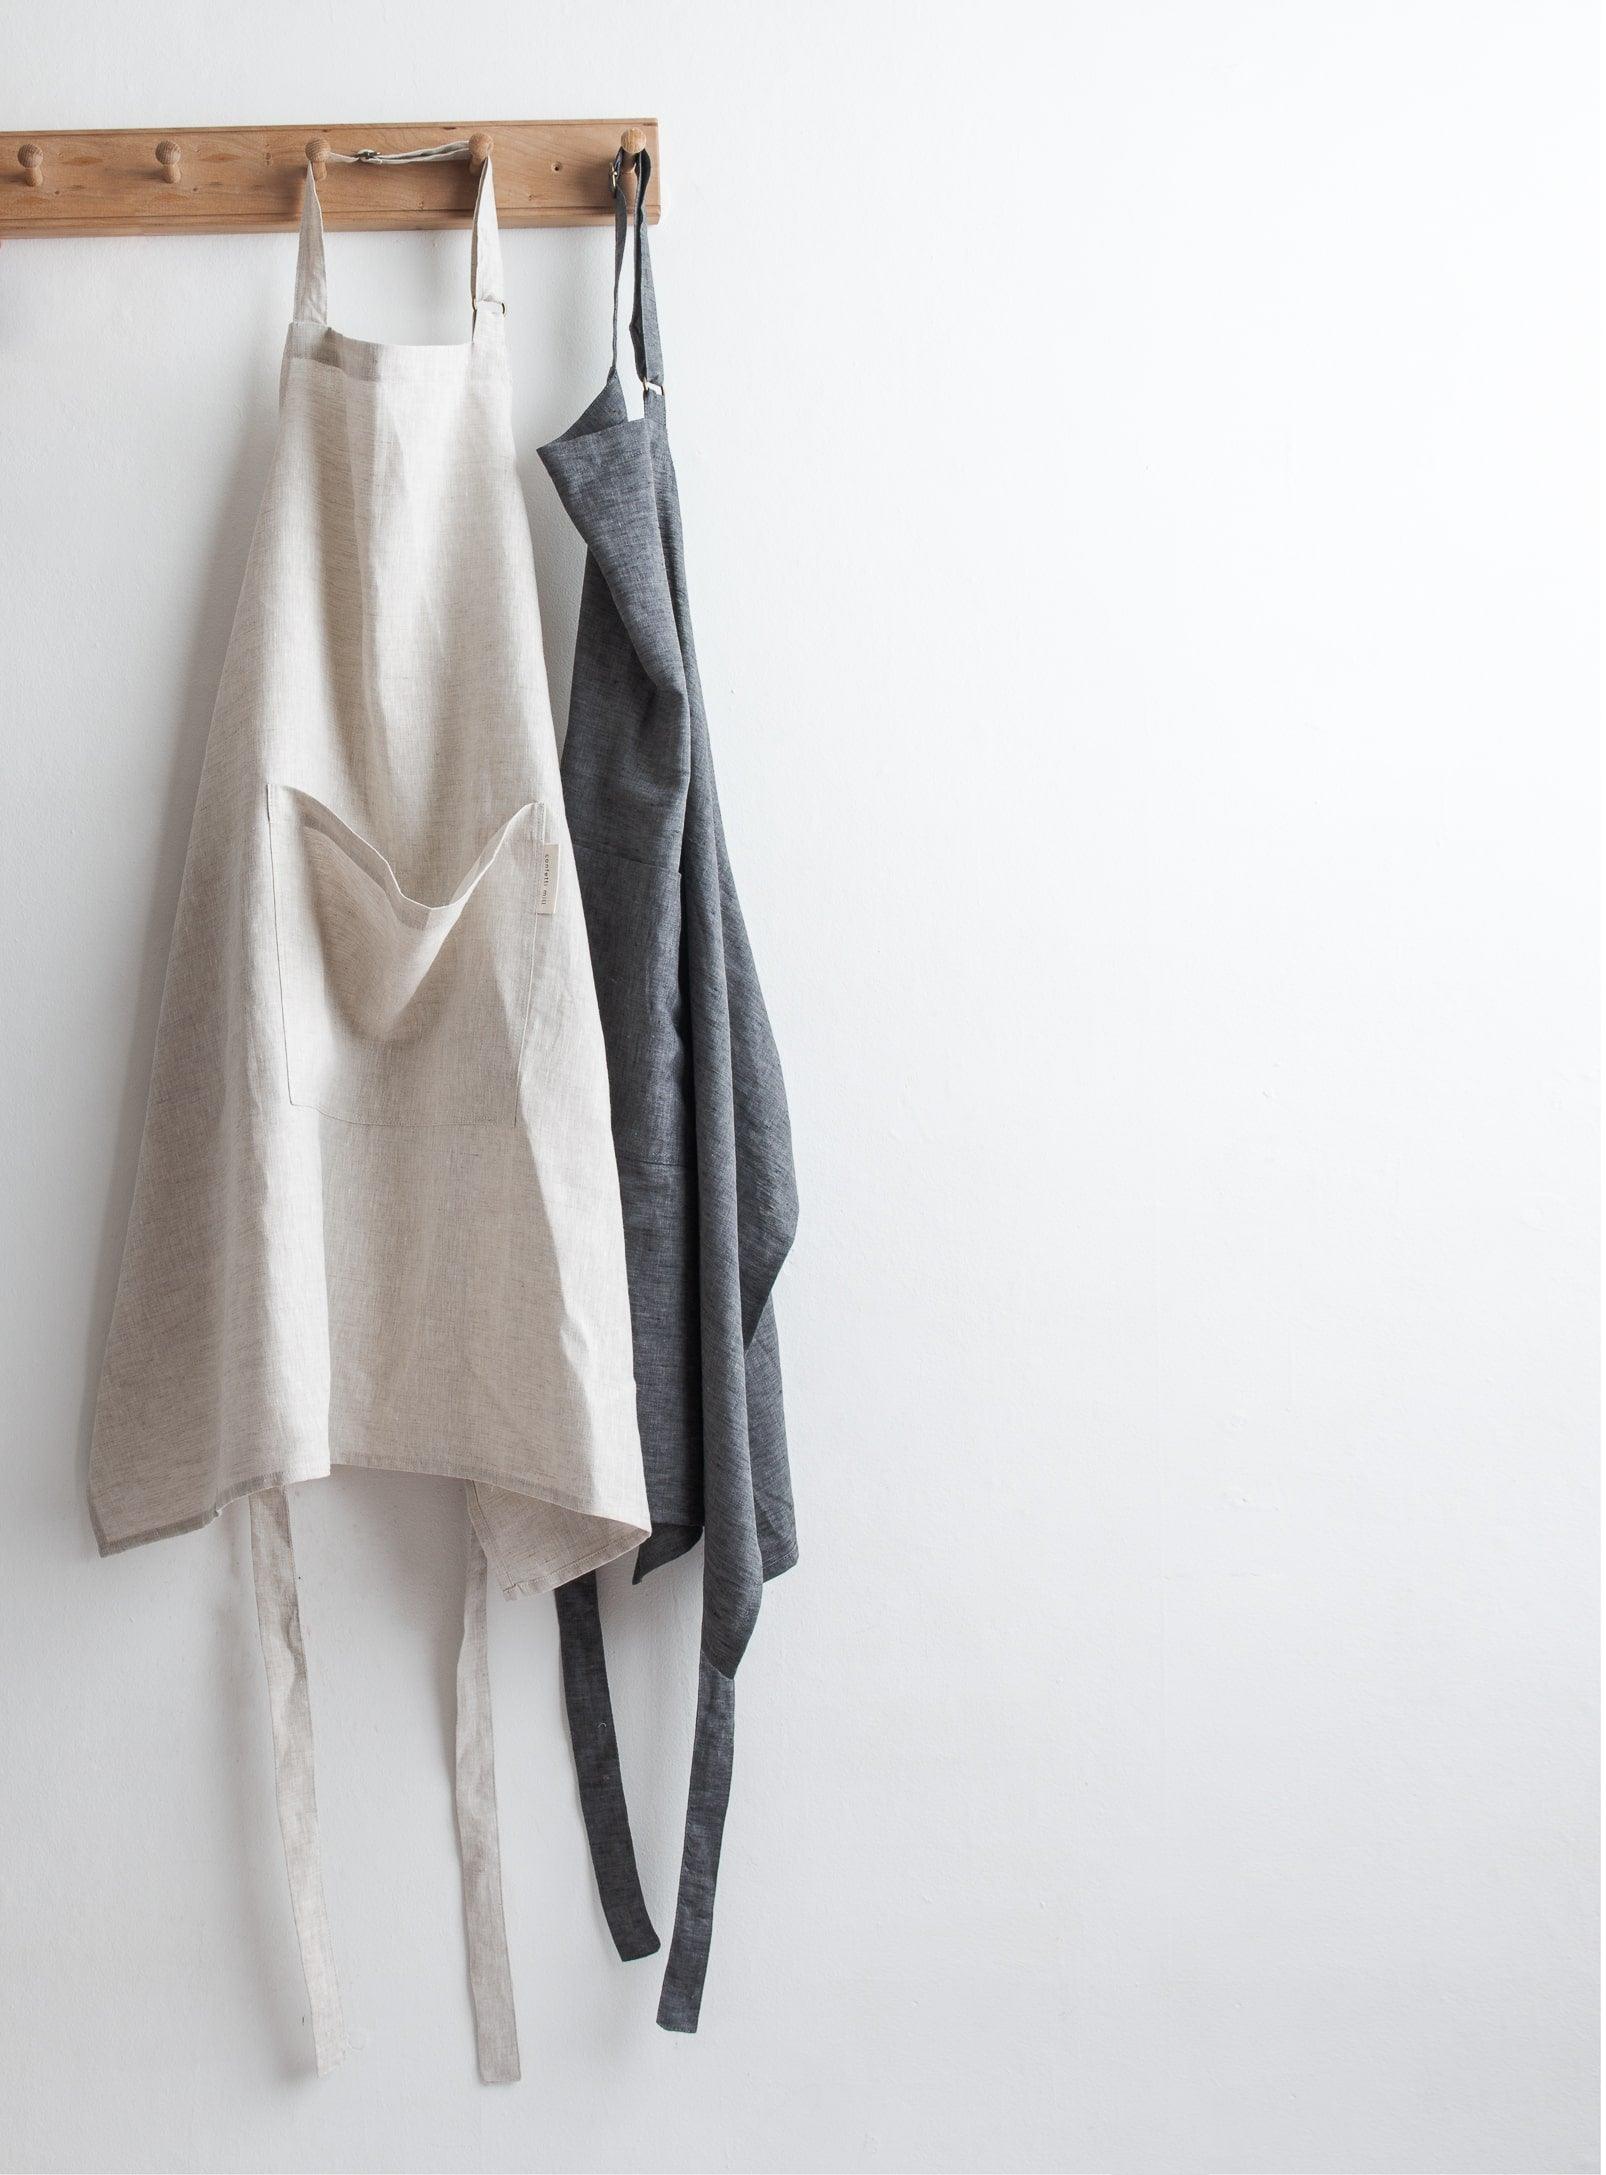 one beige and one grey apron hung on a wooden peg rail